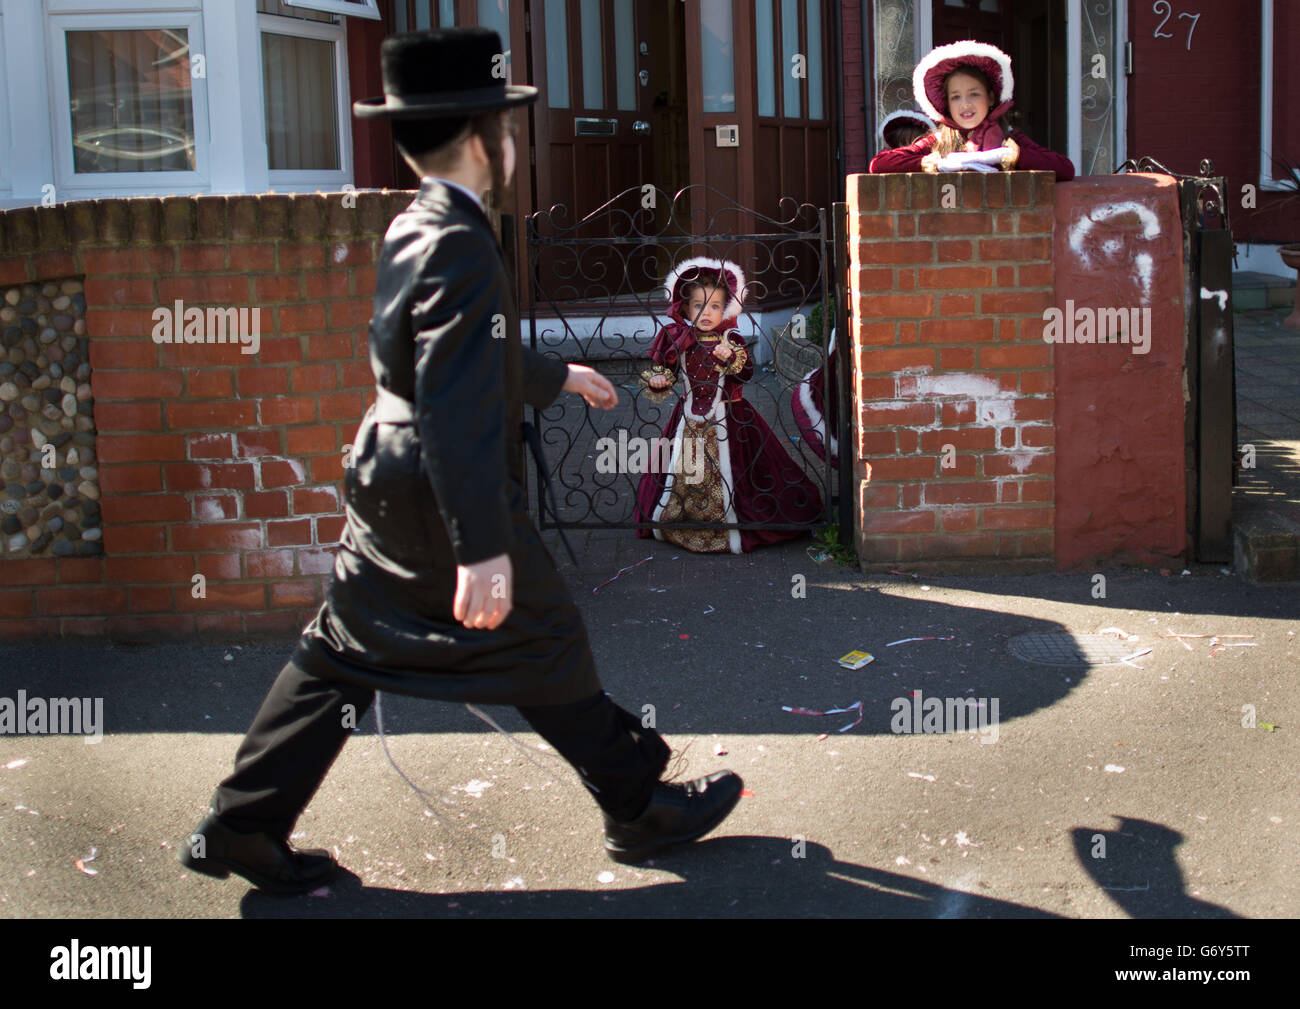 Orthodox Jewish children celebrate the festival of Purim in the streets of Stamford Hill in north London. The holiday that commemorates the deliverance of the Jewish people in the ancient Persian Empire from destruction in the wake of a plot by Haman, a story recorded in the Biblical Book of Esther is marked by parties in which children wear fancy dress costumes and take gifts to neighbouring friends and family. Stock Photo